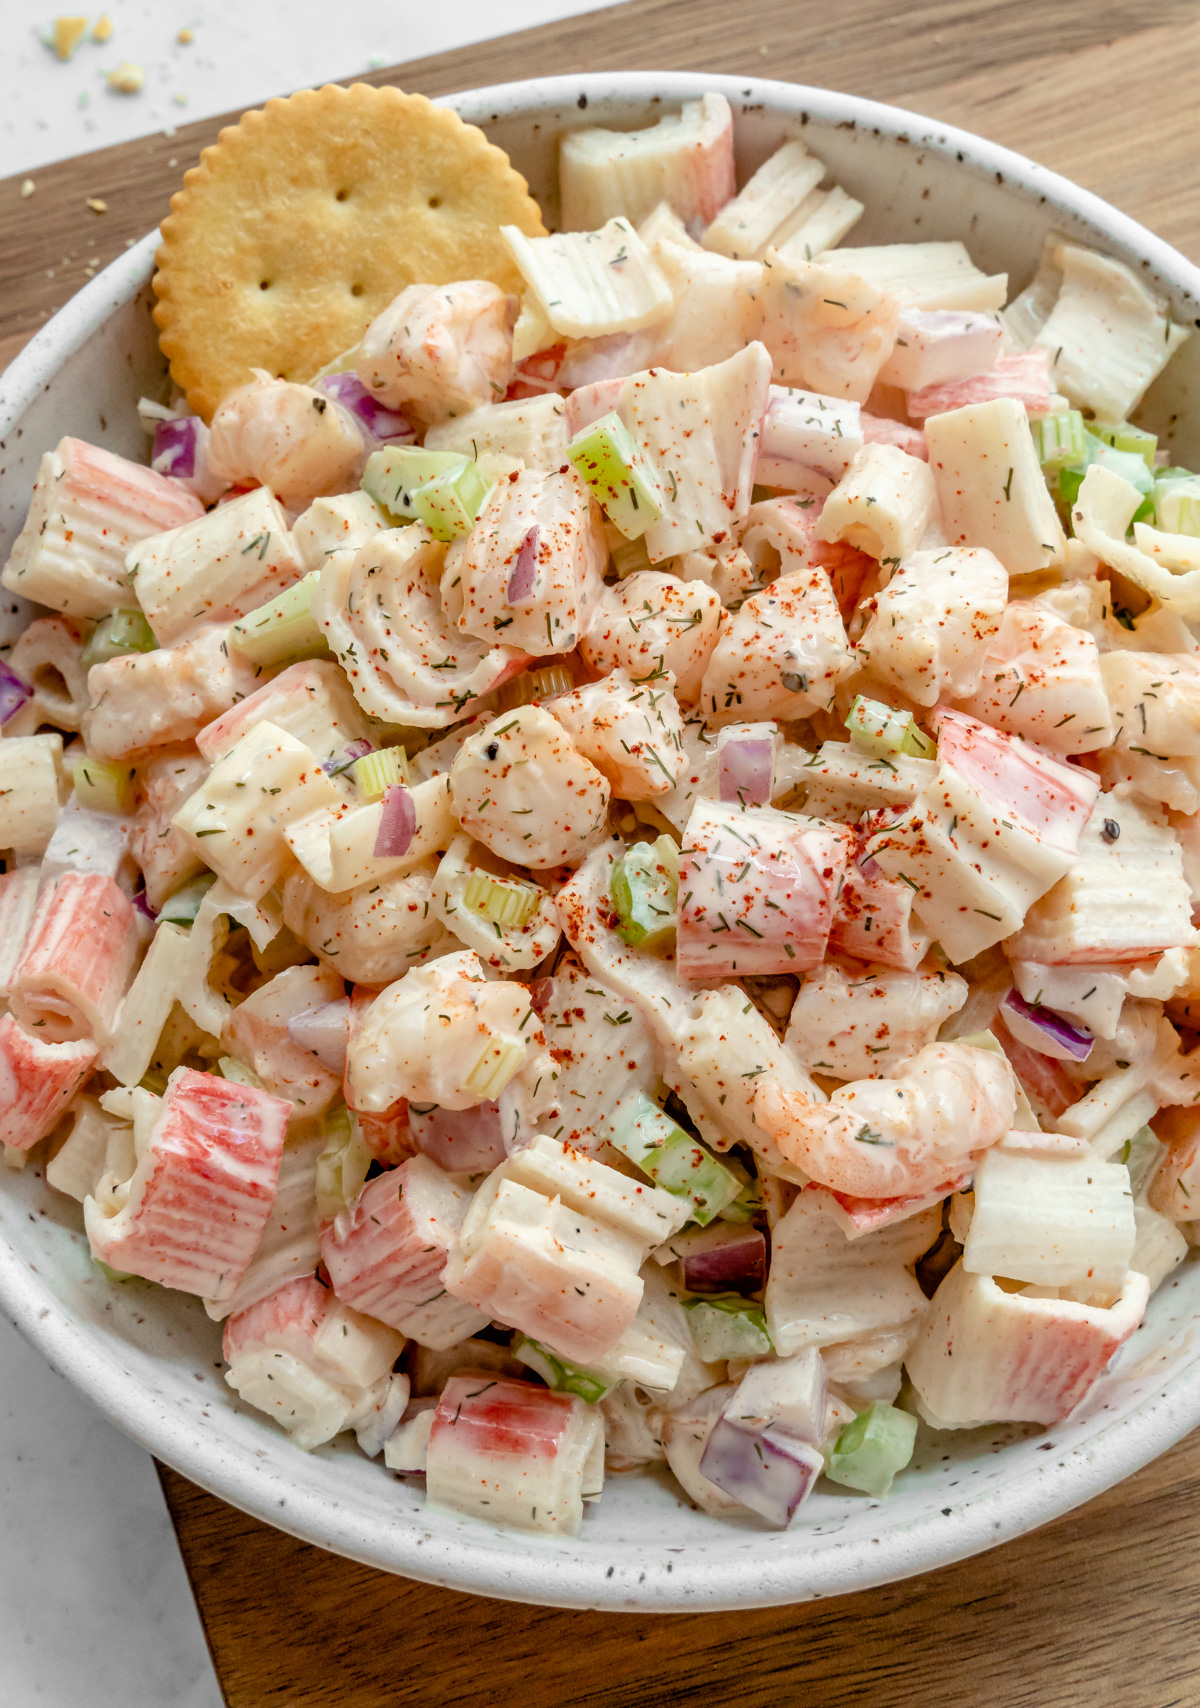 Bowl of Seafood Salad with cracker